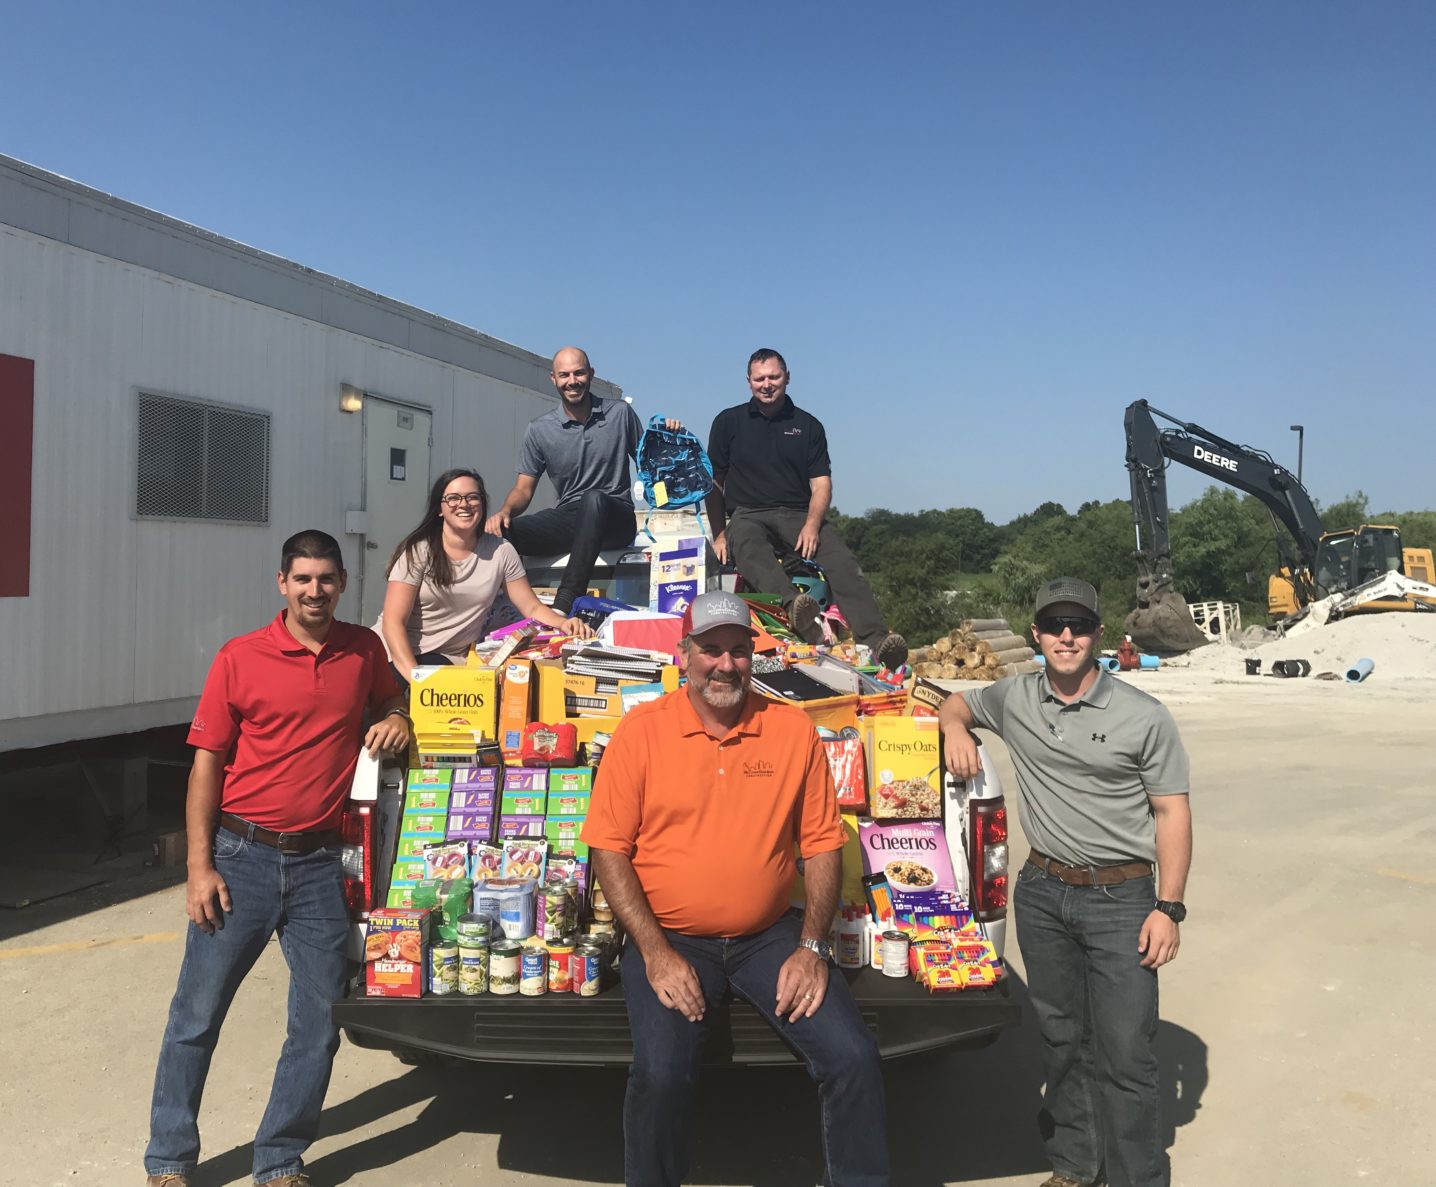 The Belton High School project team worked with our trade partners to collect food and school supplies for the Belton, Missouri Chamber of Commerce.